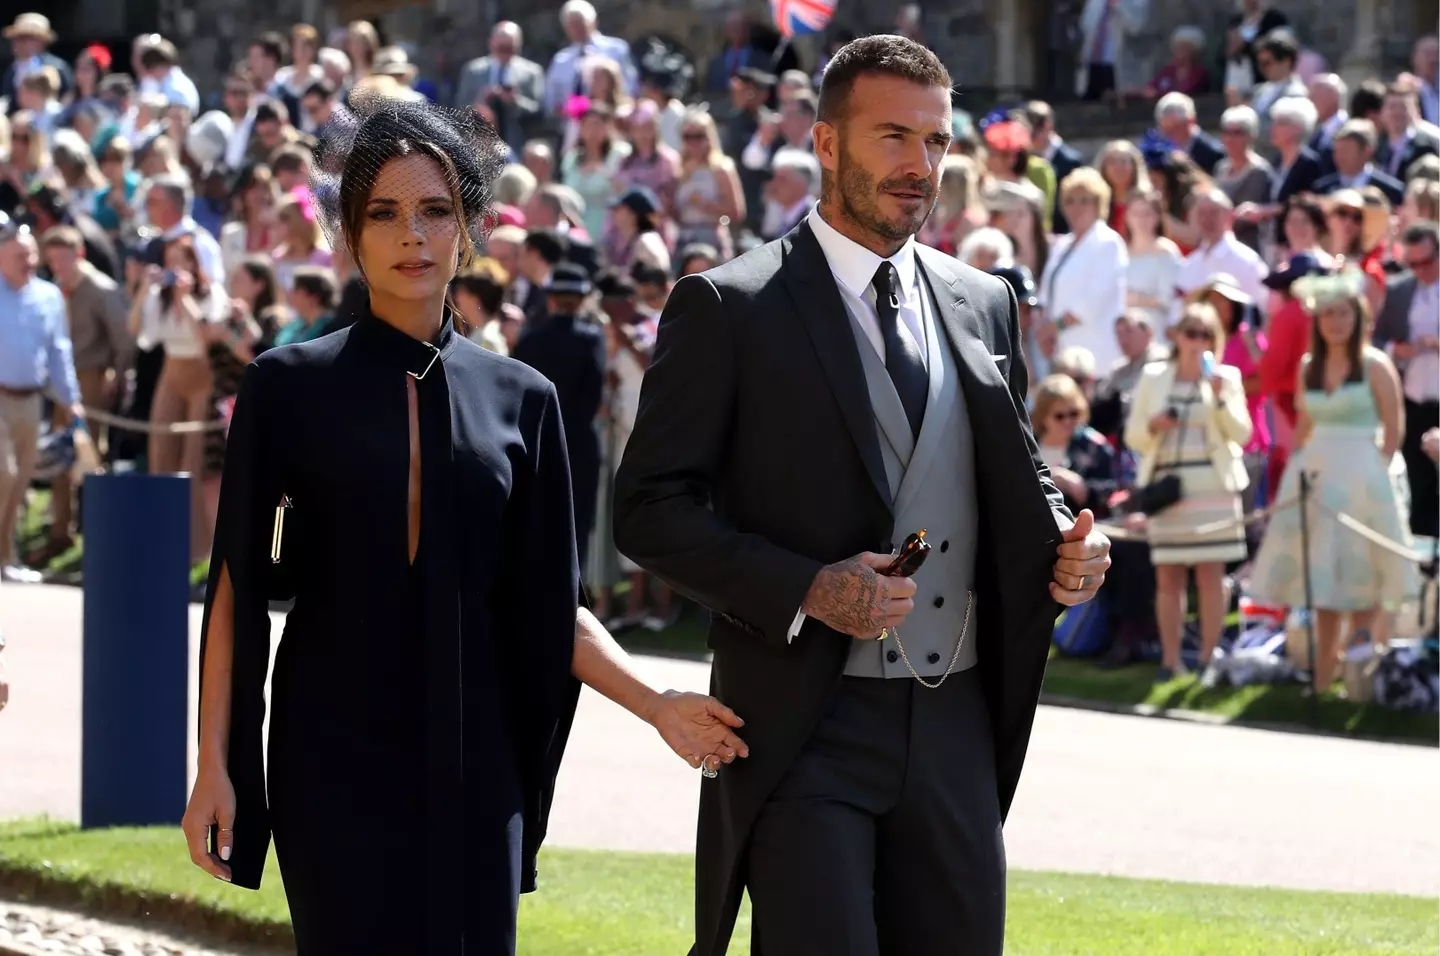 Victoria Beckham says husband David Beckham has a p***s that is like a “tractor exhaust pipe.”